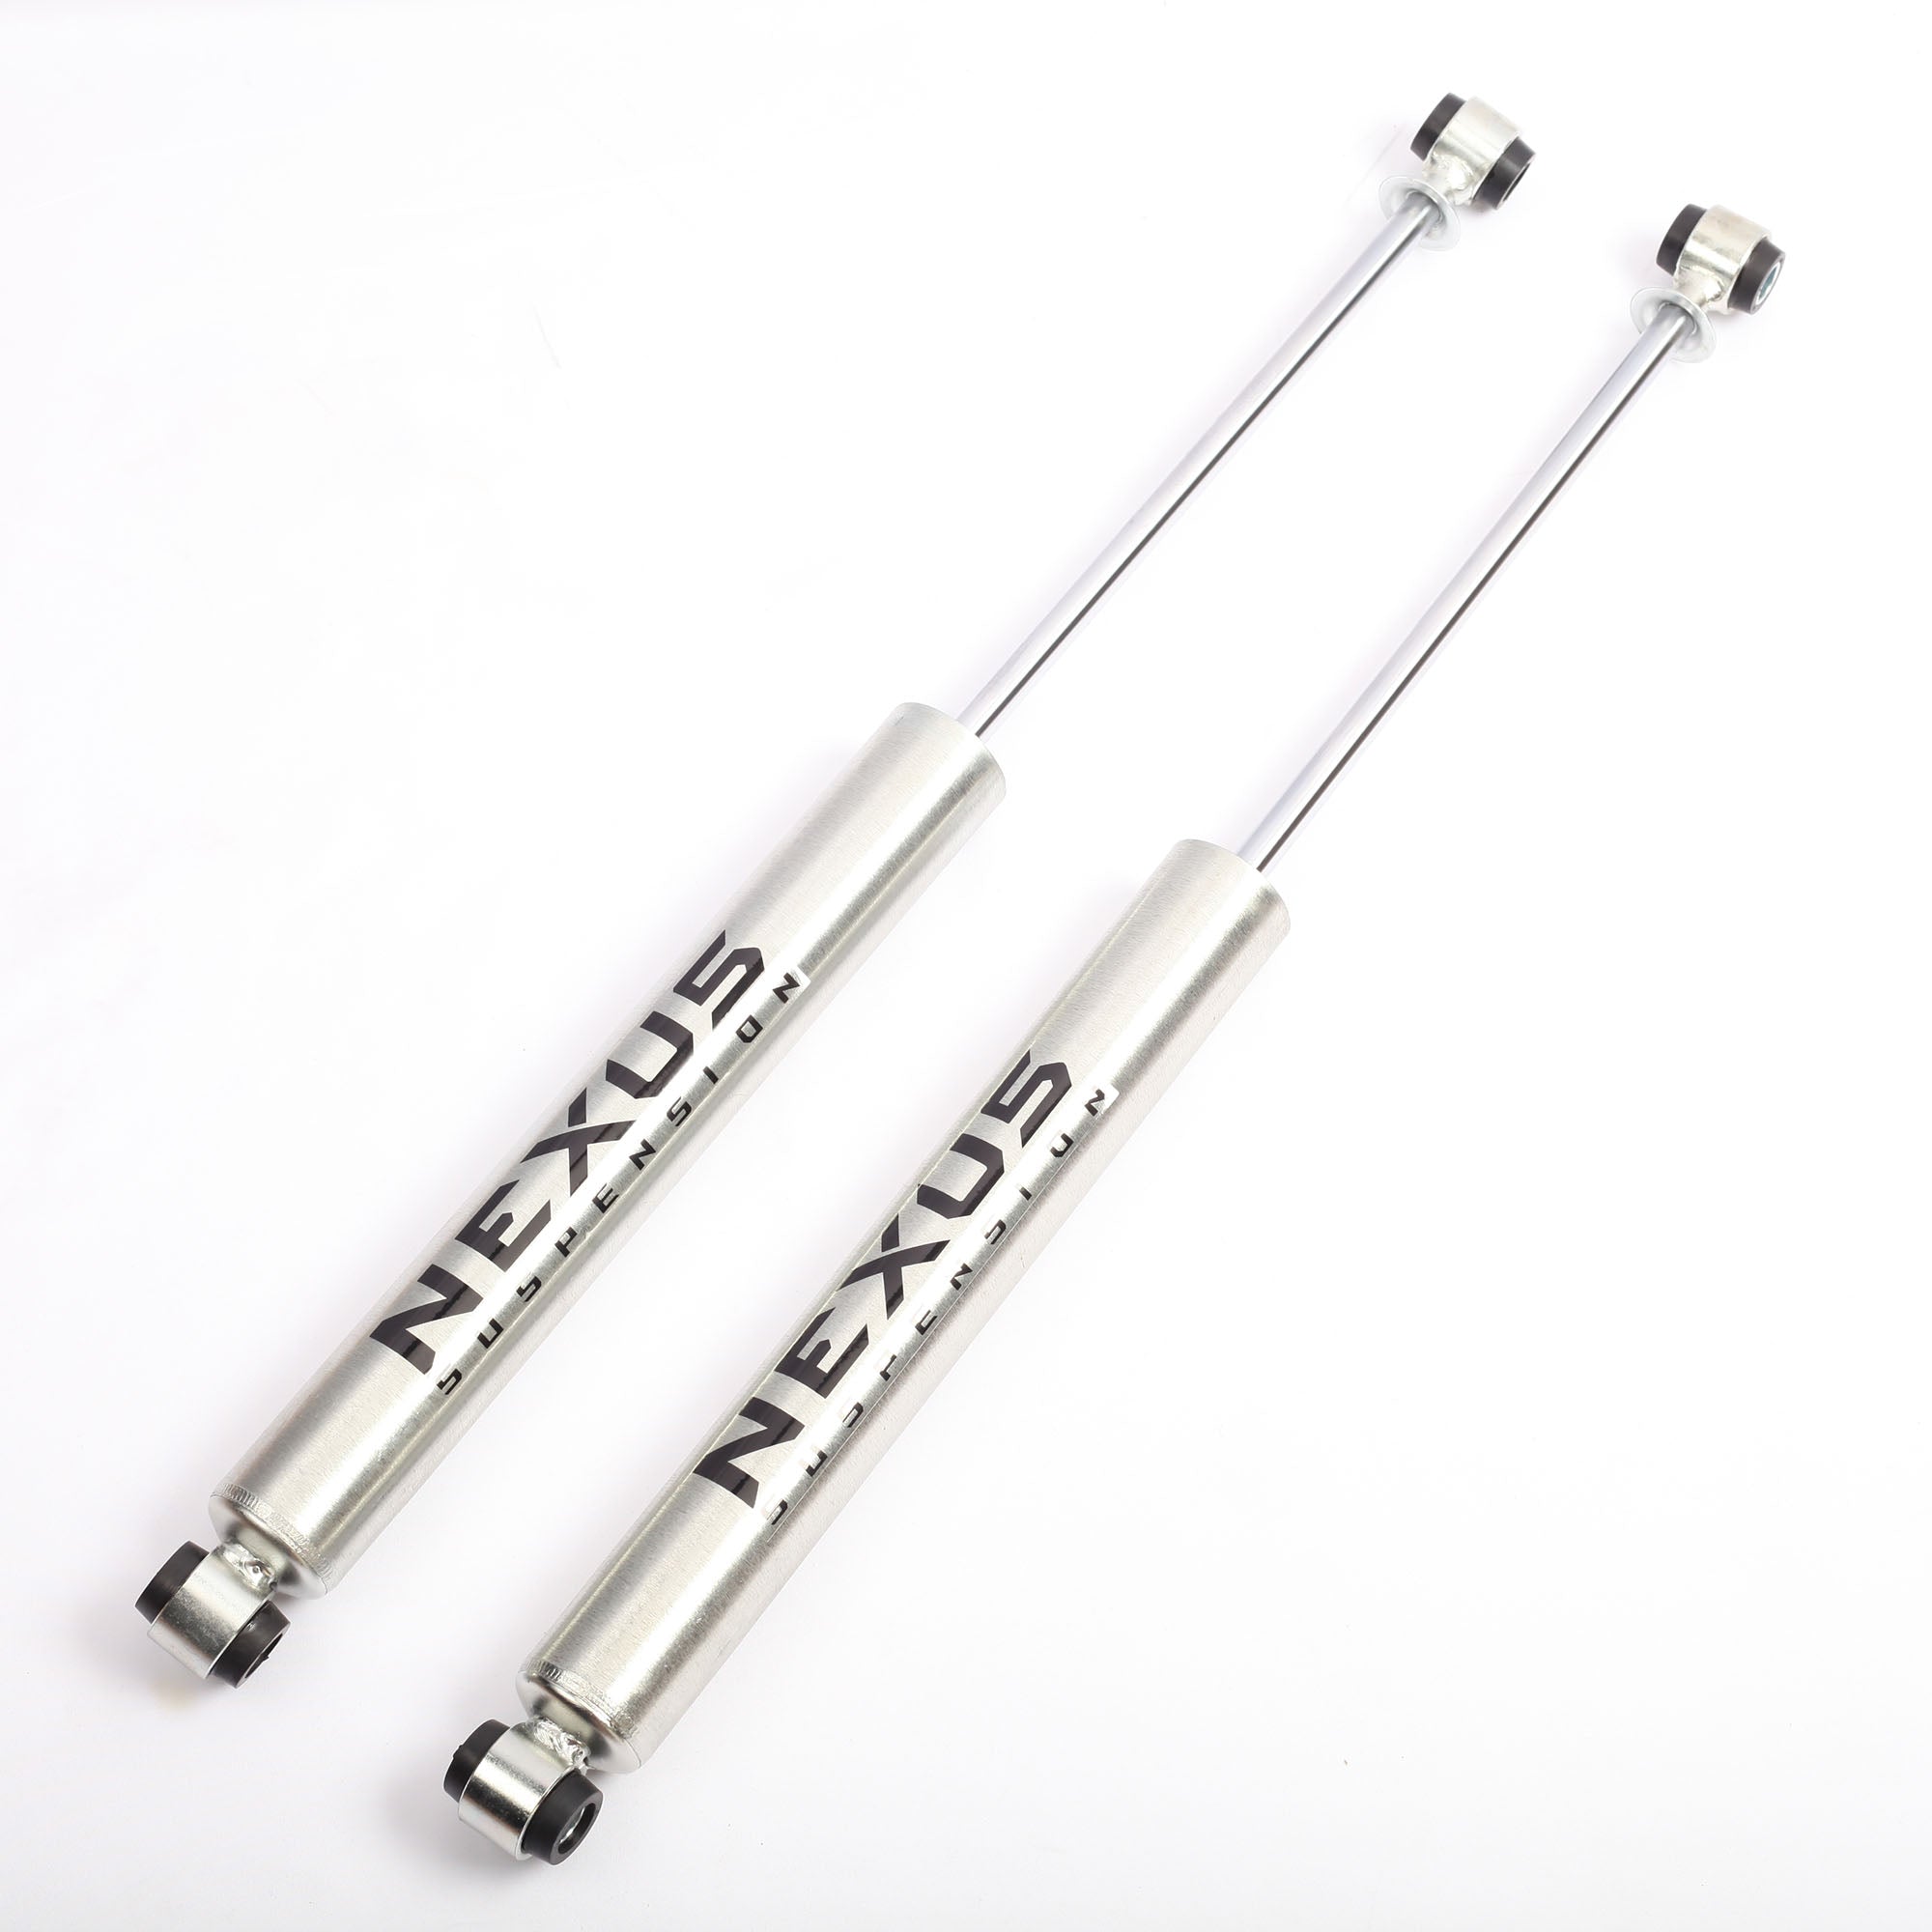 NEXUS SUSPENSION 6Inch Lift Rear Shock Absorber for 2000-2012 GMC Yukon XL 1500 4WD,Zinc Plated Coating,Pair Pack